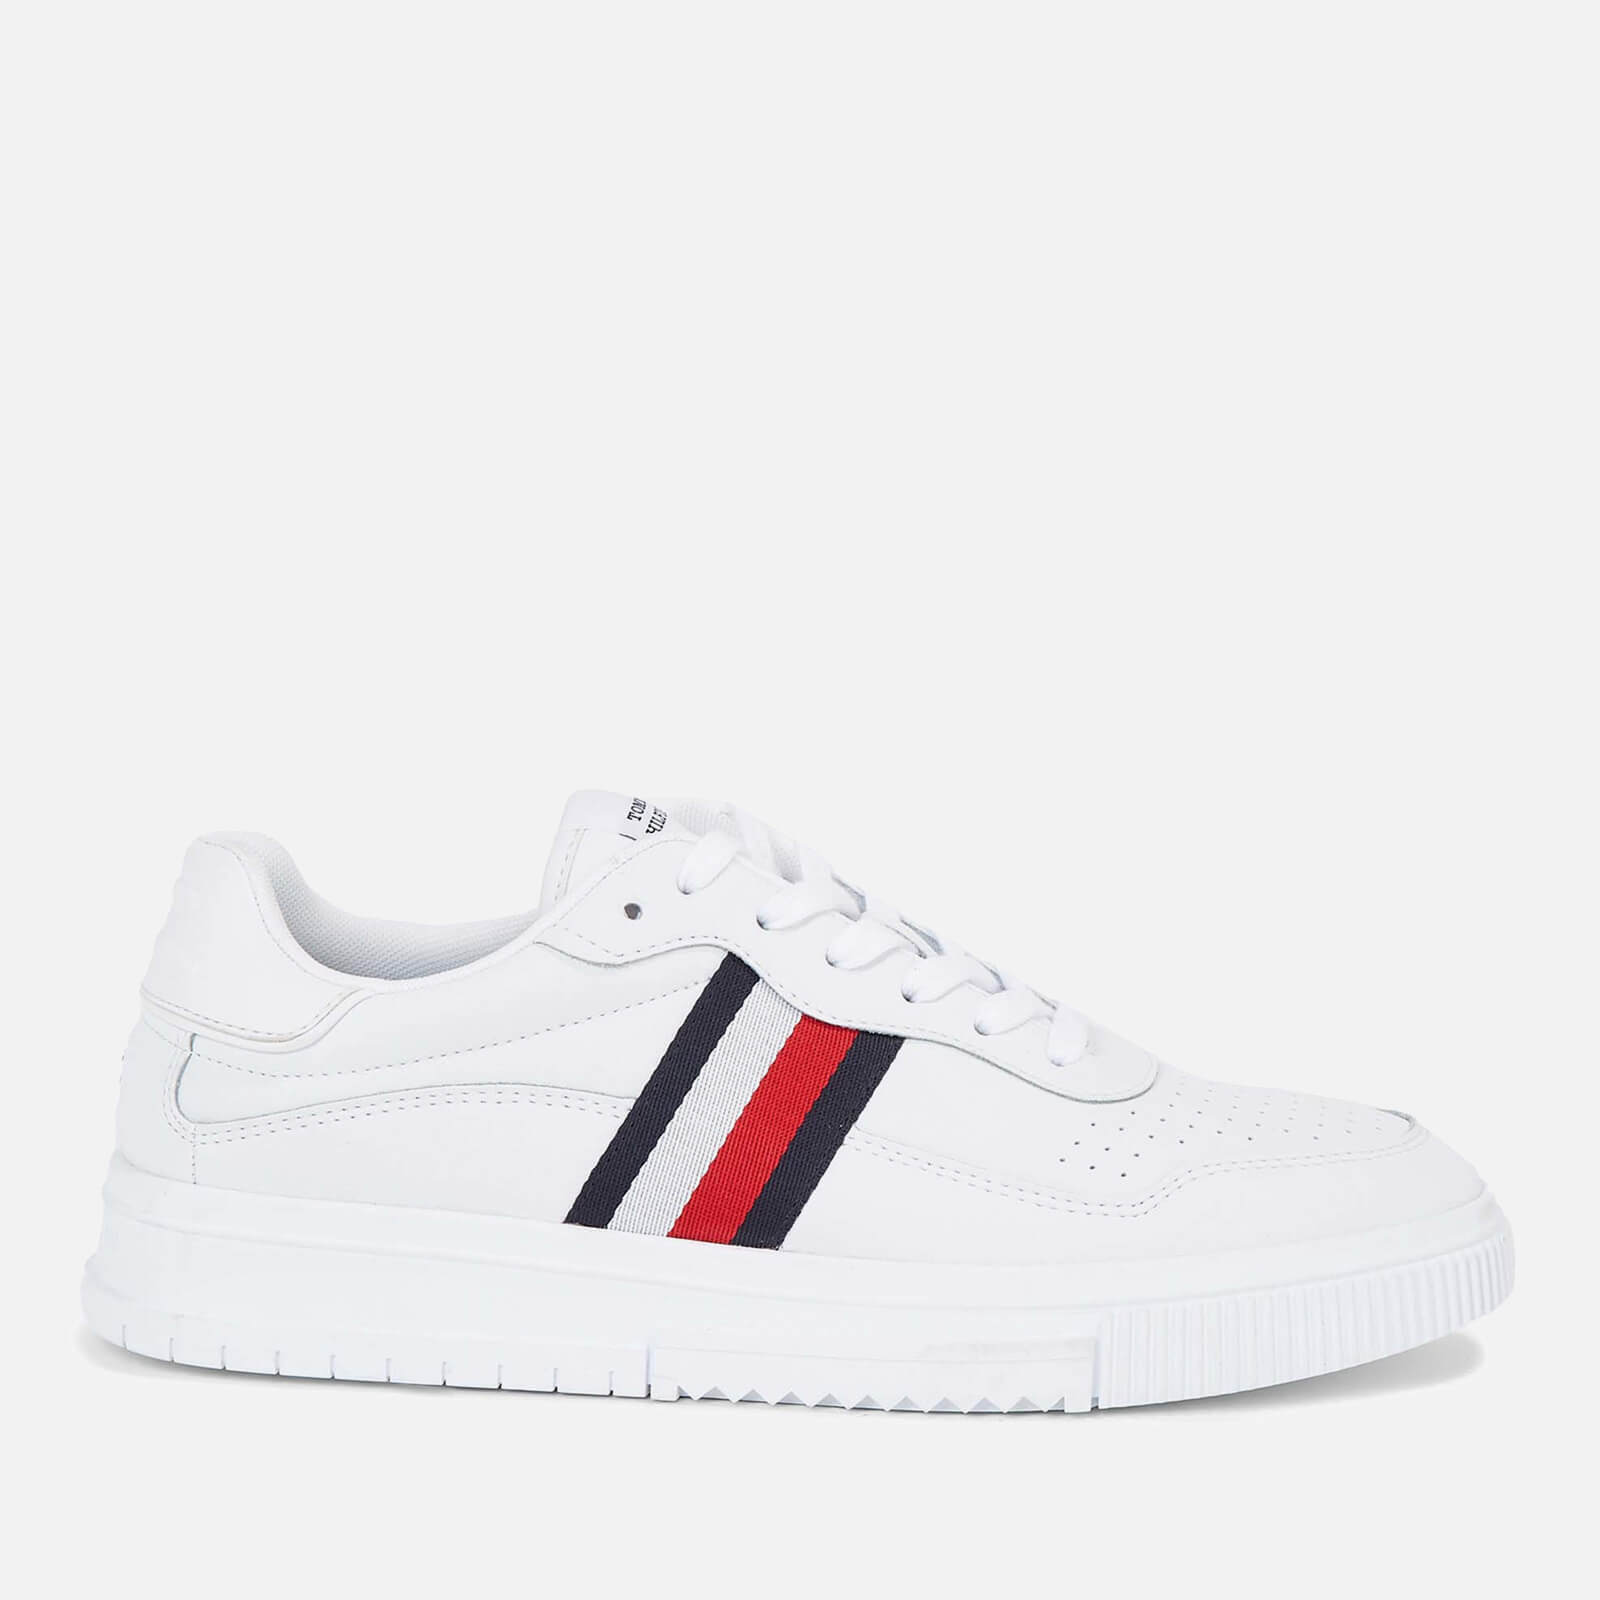 Tommy Hilfiger Men’s Supercup Stripes Leather Trainers